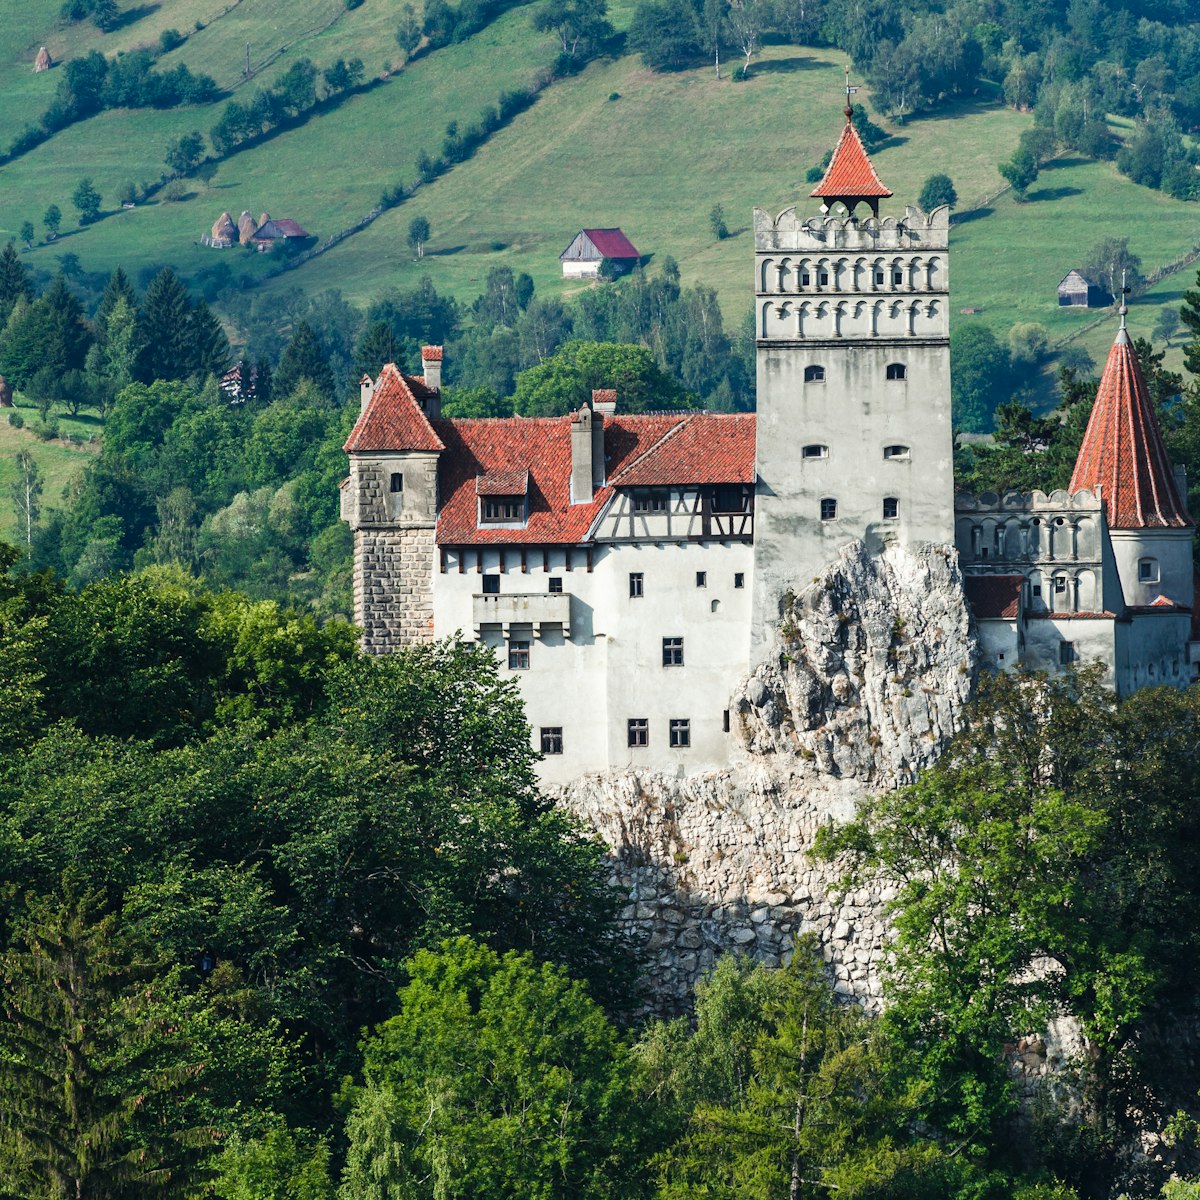 The medieval Castle of Bran. The castle  guarded in the past the border between Transylvania an Wallachia. It is also known for the myth of Dracula.; Shutterstock ID 114267793; Your name (First / Last): Josh Vogel; Project no. or GL code: 56530; Network activity no. or Cost Centre: Online-Design; Product or Project: 65050/7529/Josh Vogel/LP.com Destination Galleries